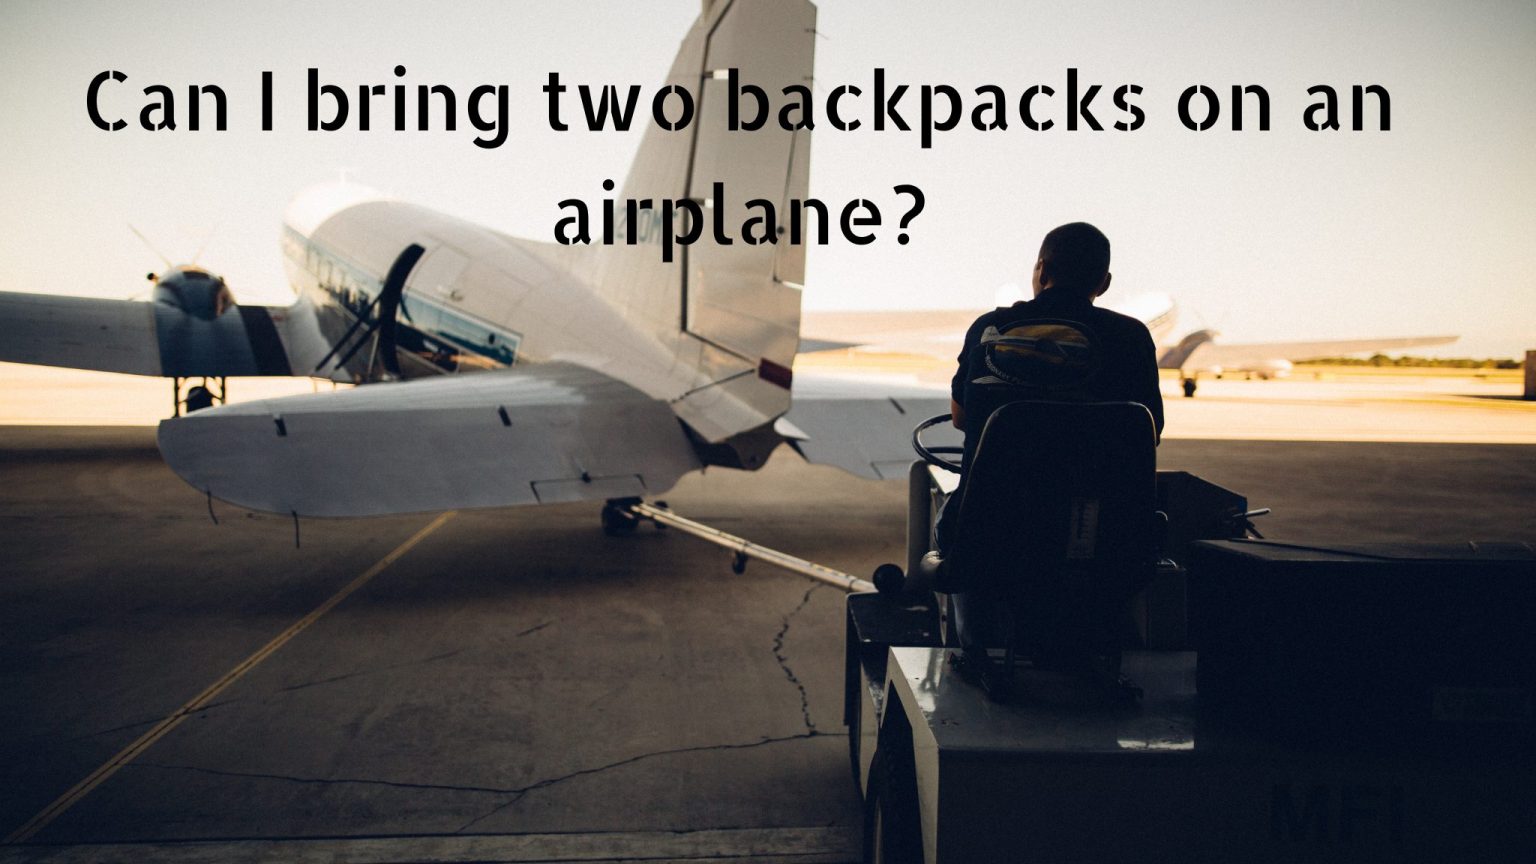 Can I bring two backpacks on an airplane?